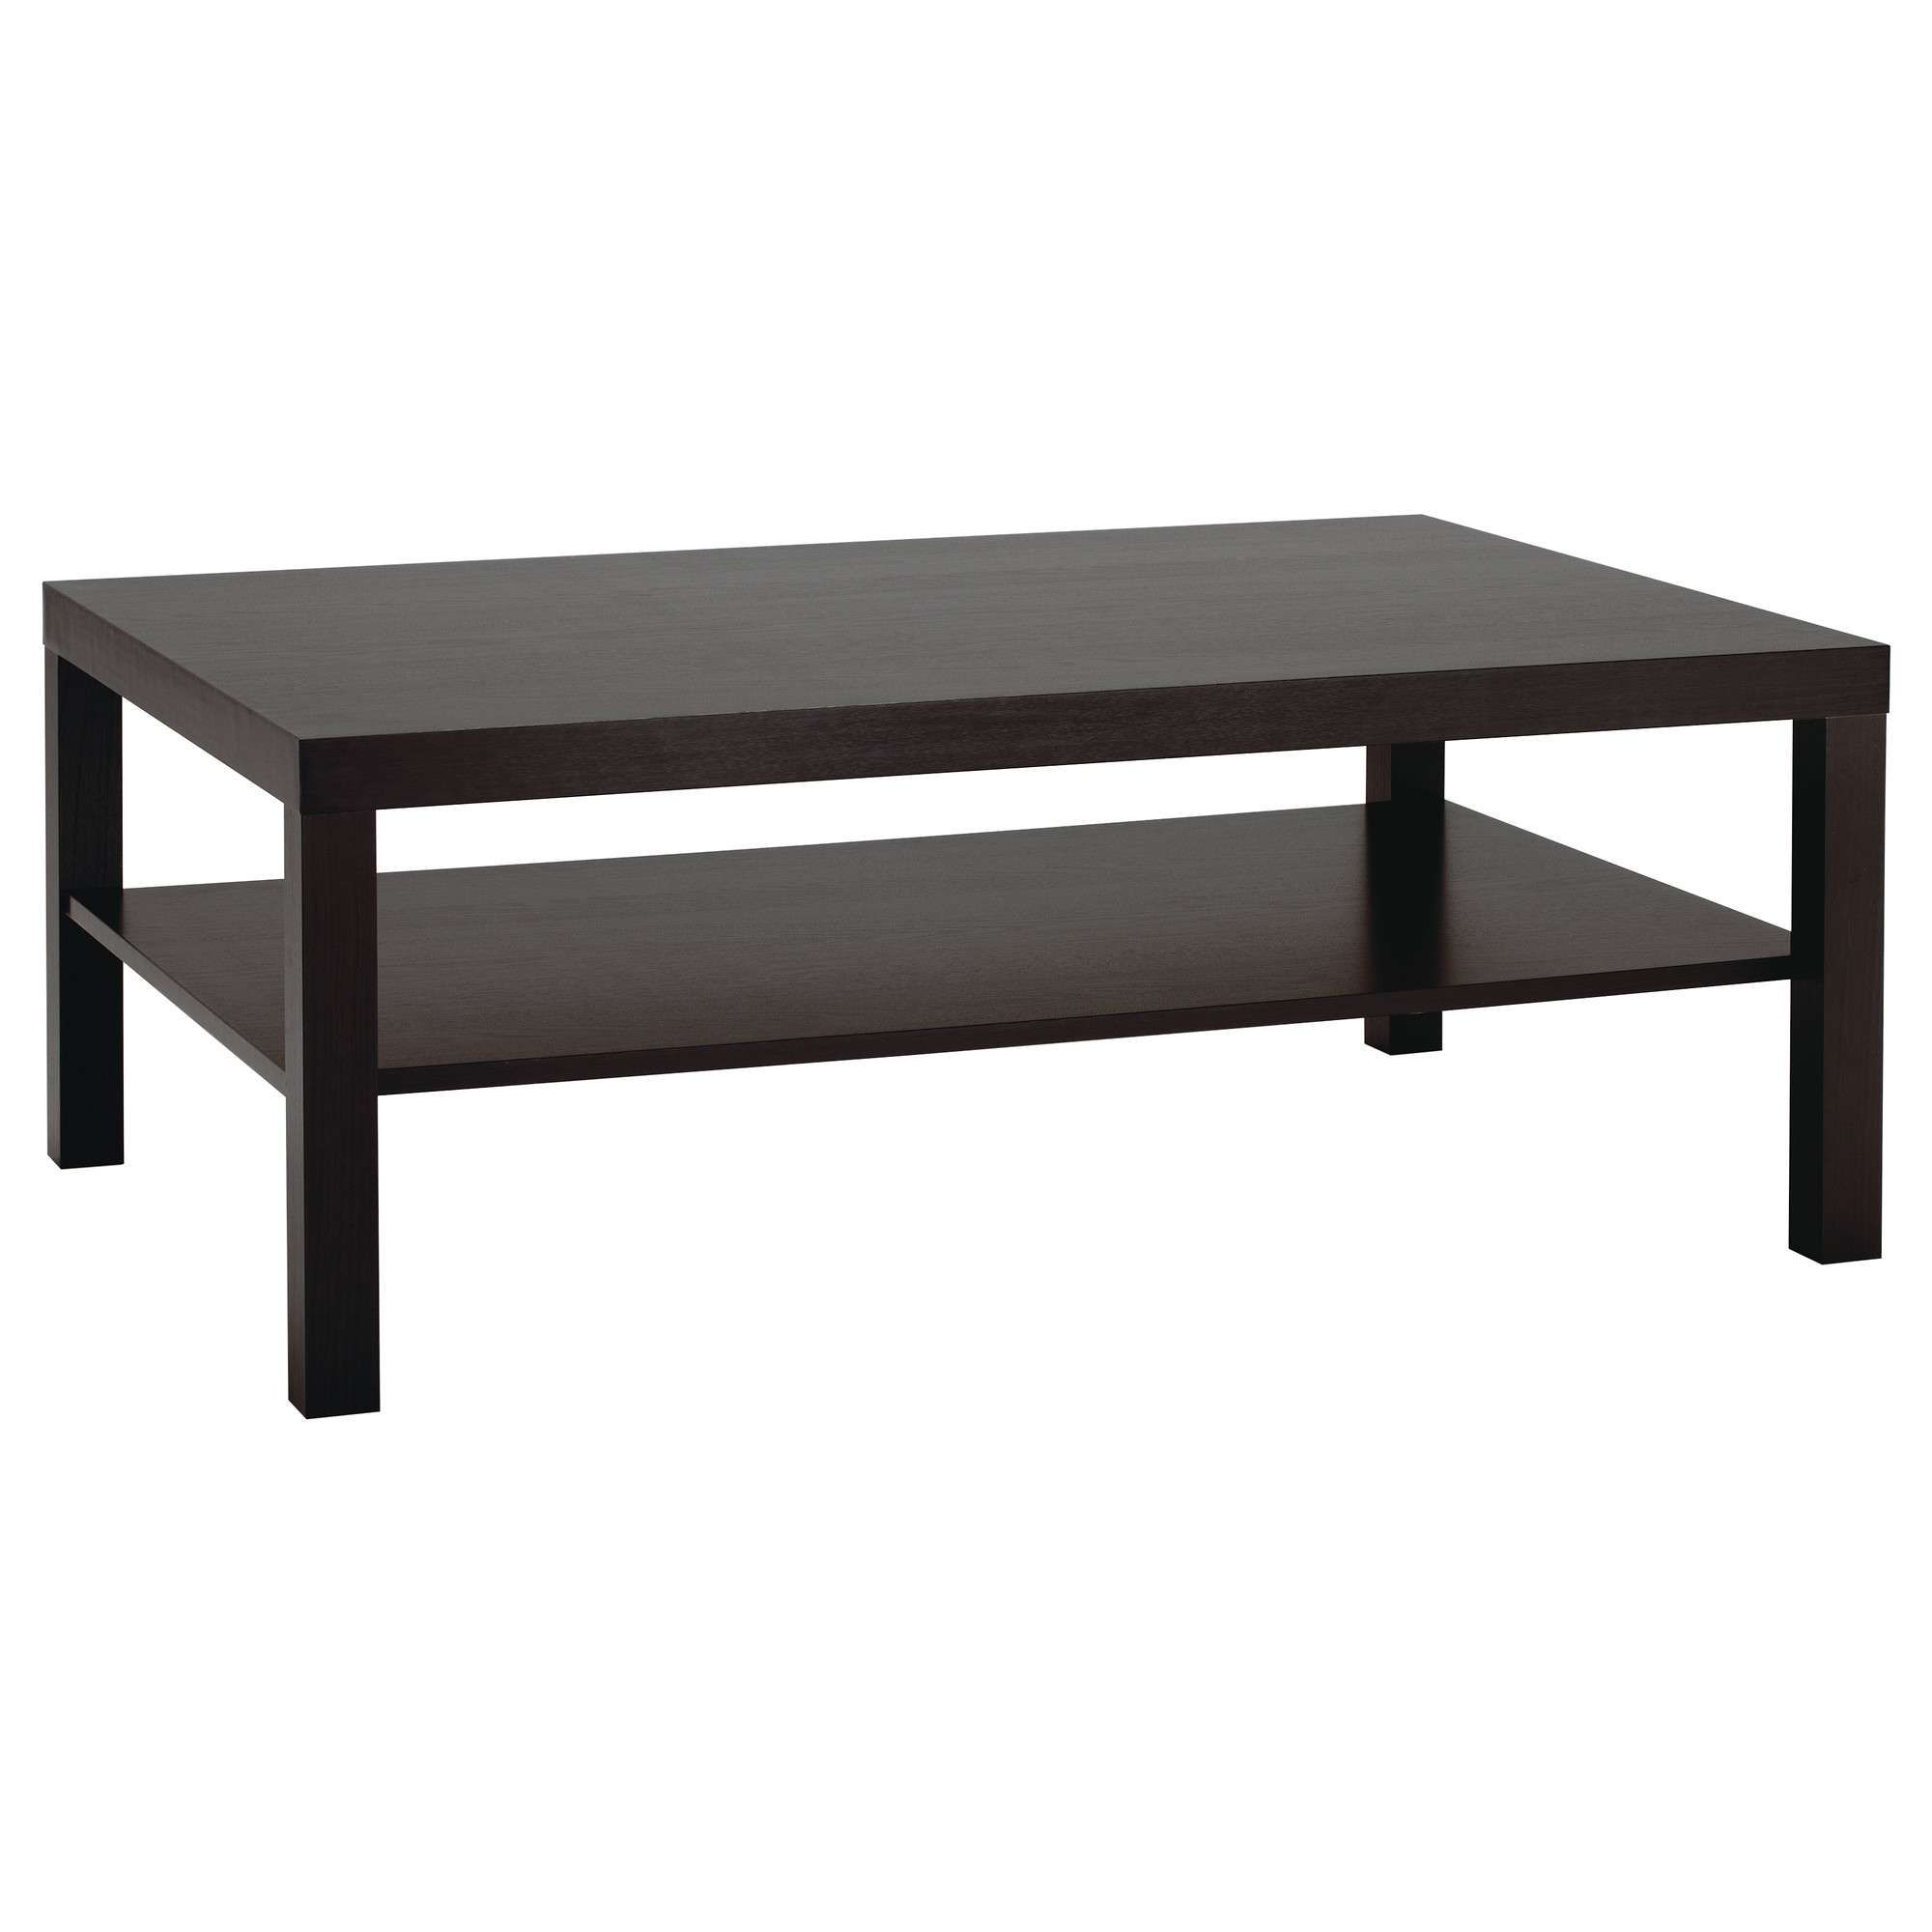 Lack Coffee Table – Black Brown – Ikea Throughout Widely Used Black Coffee Tables (View 1 of 20)